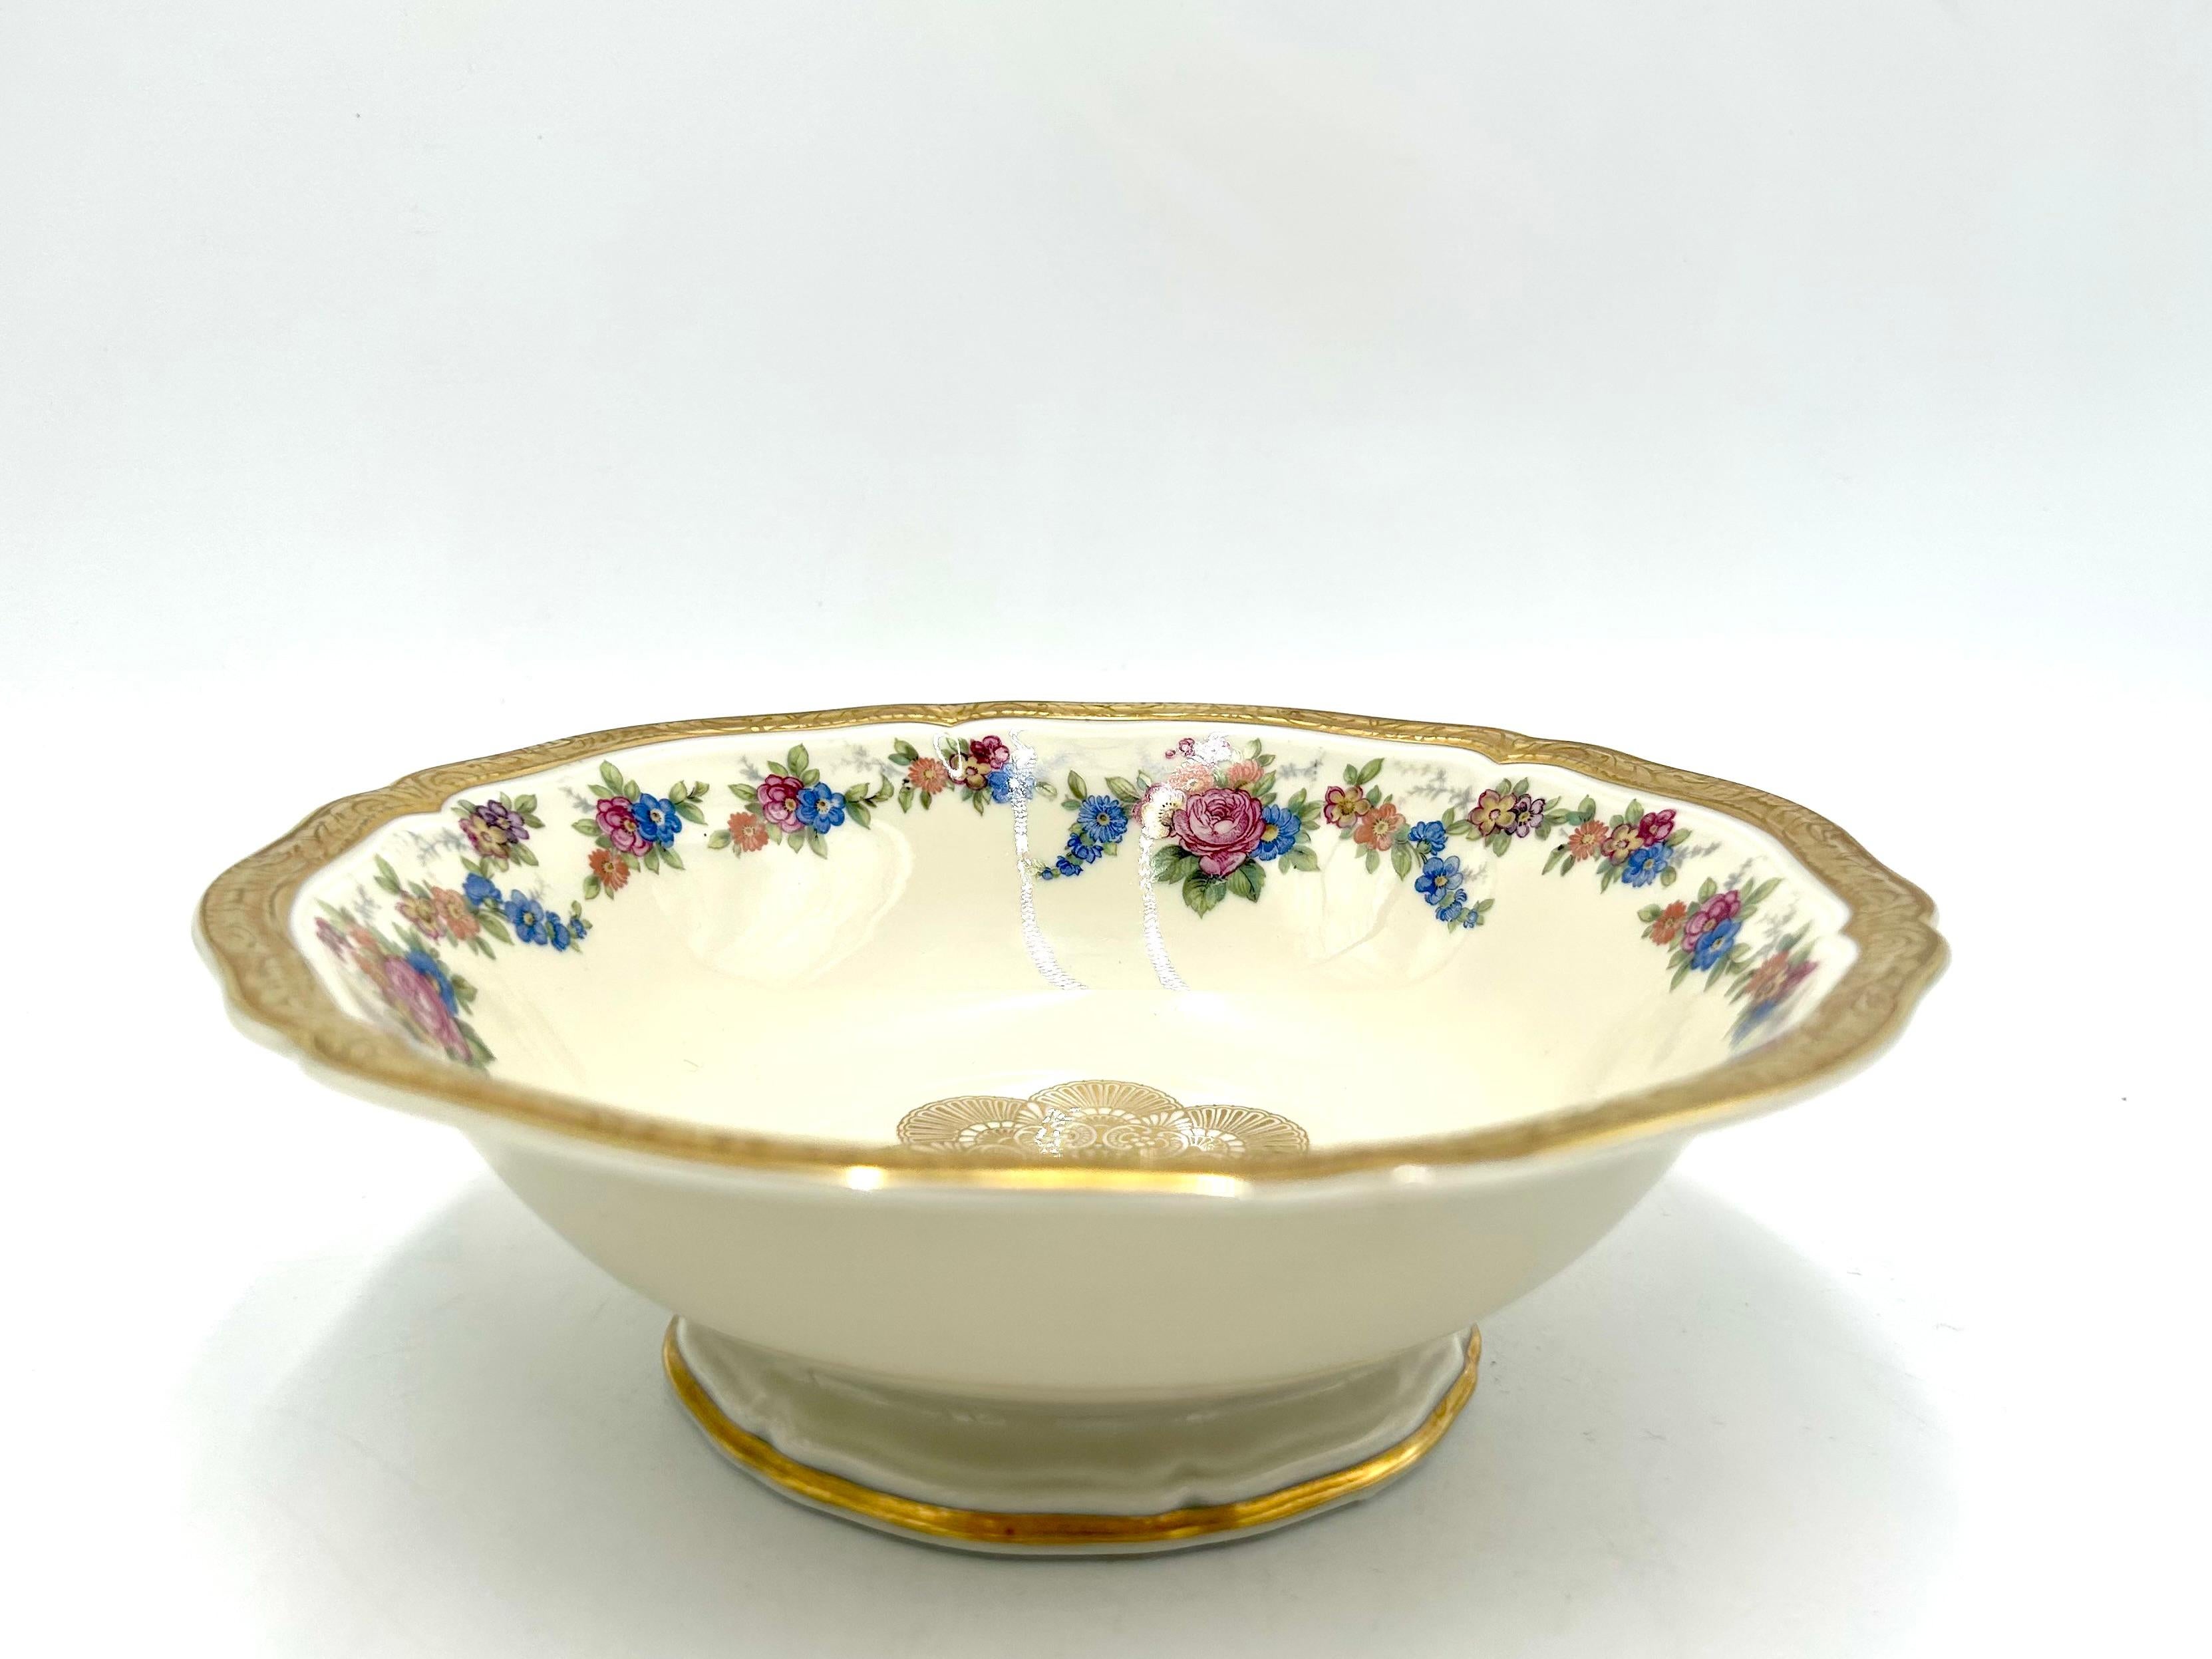 A beautiful cream porcelain bowl decorated with gilding and a floral motif

A product of the valued German manufacturer Rosenthal, marked with the mark used in 1943-1948.

A platter from the classic elegant Chippendale series.

Very good